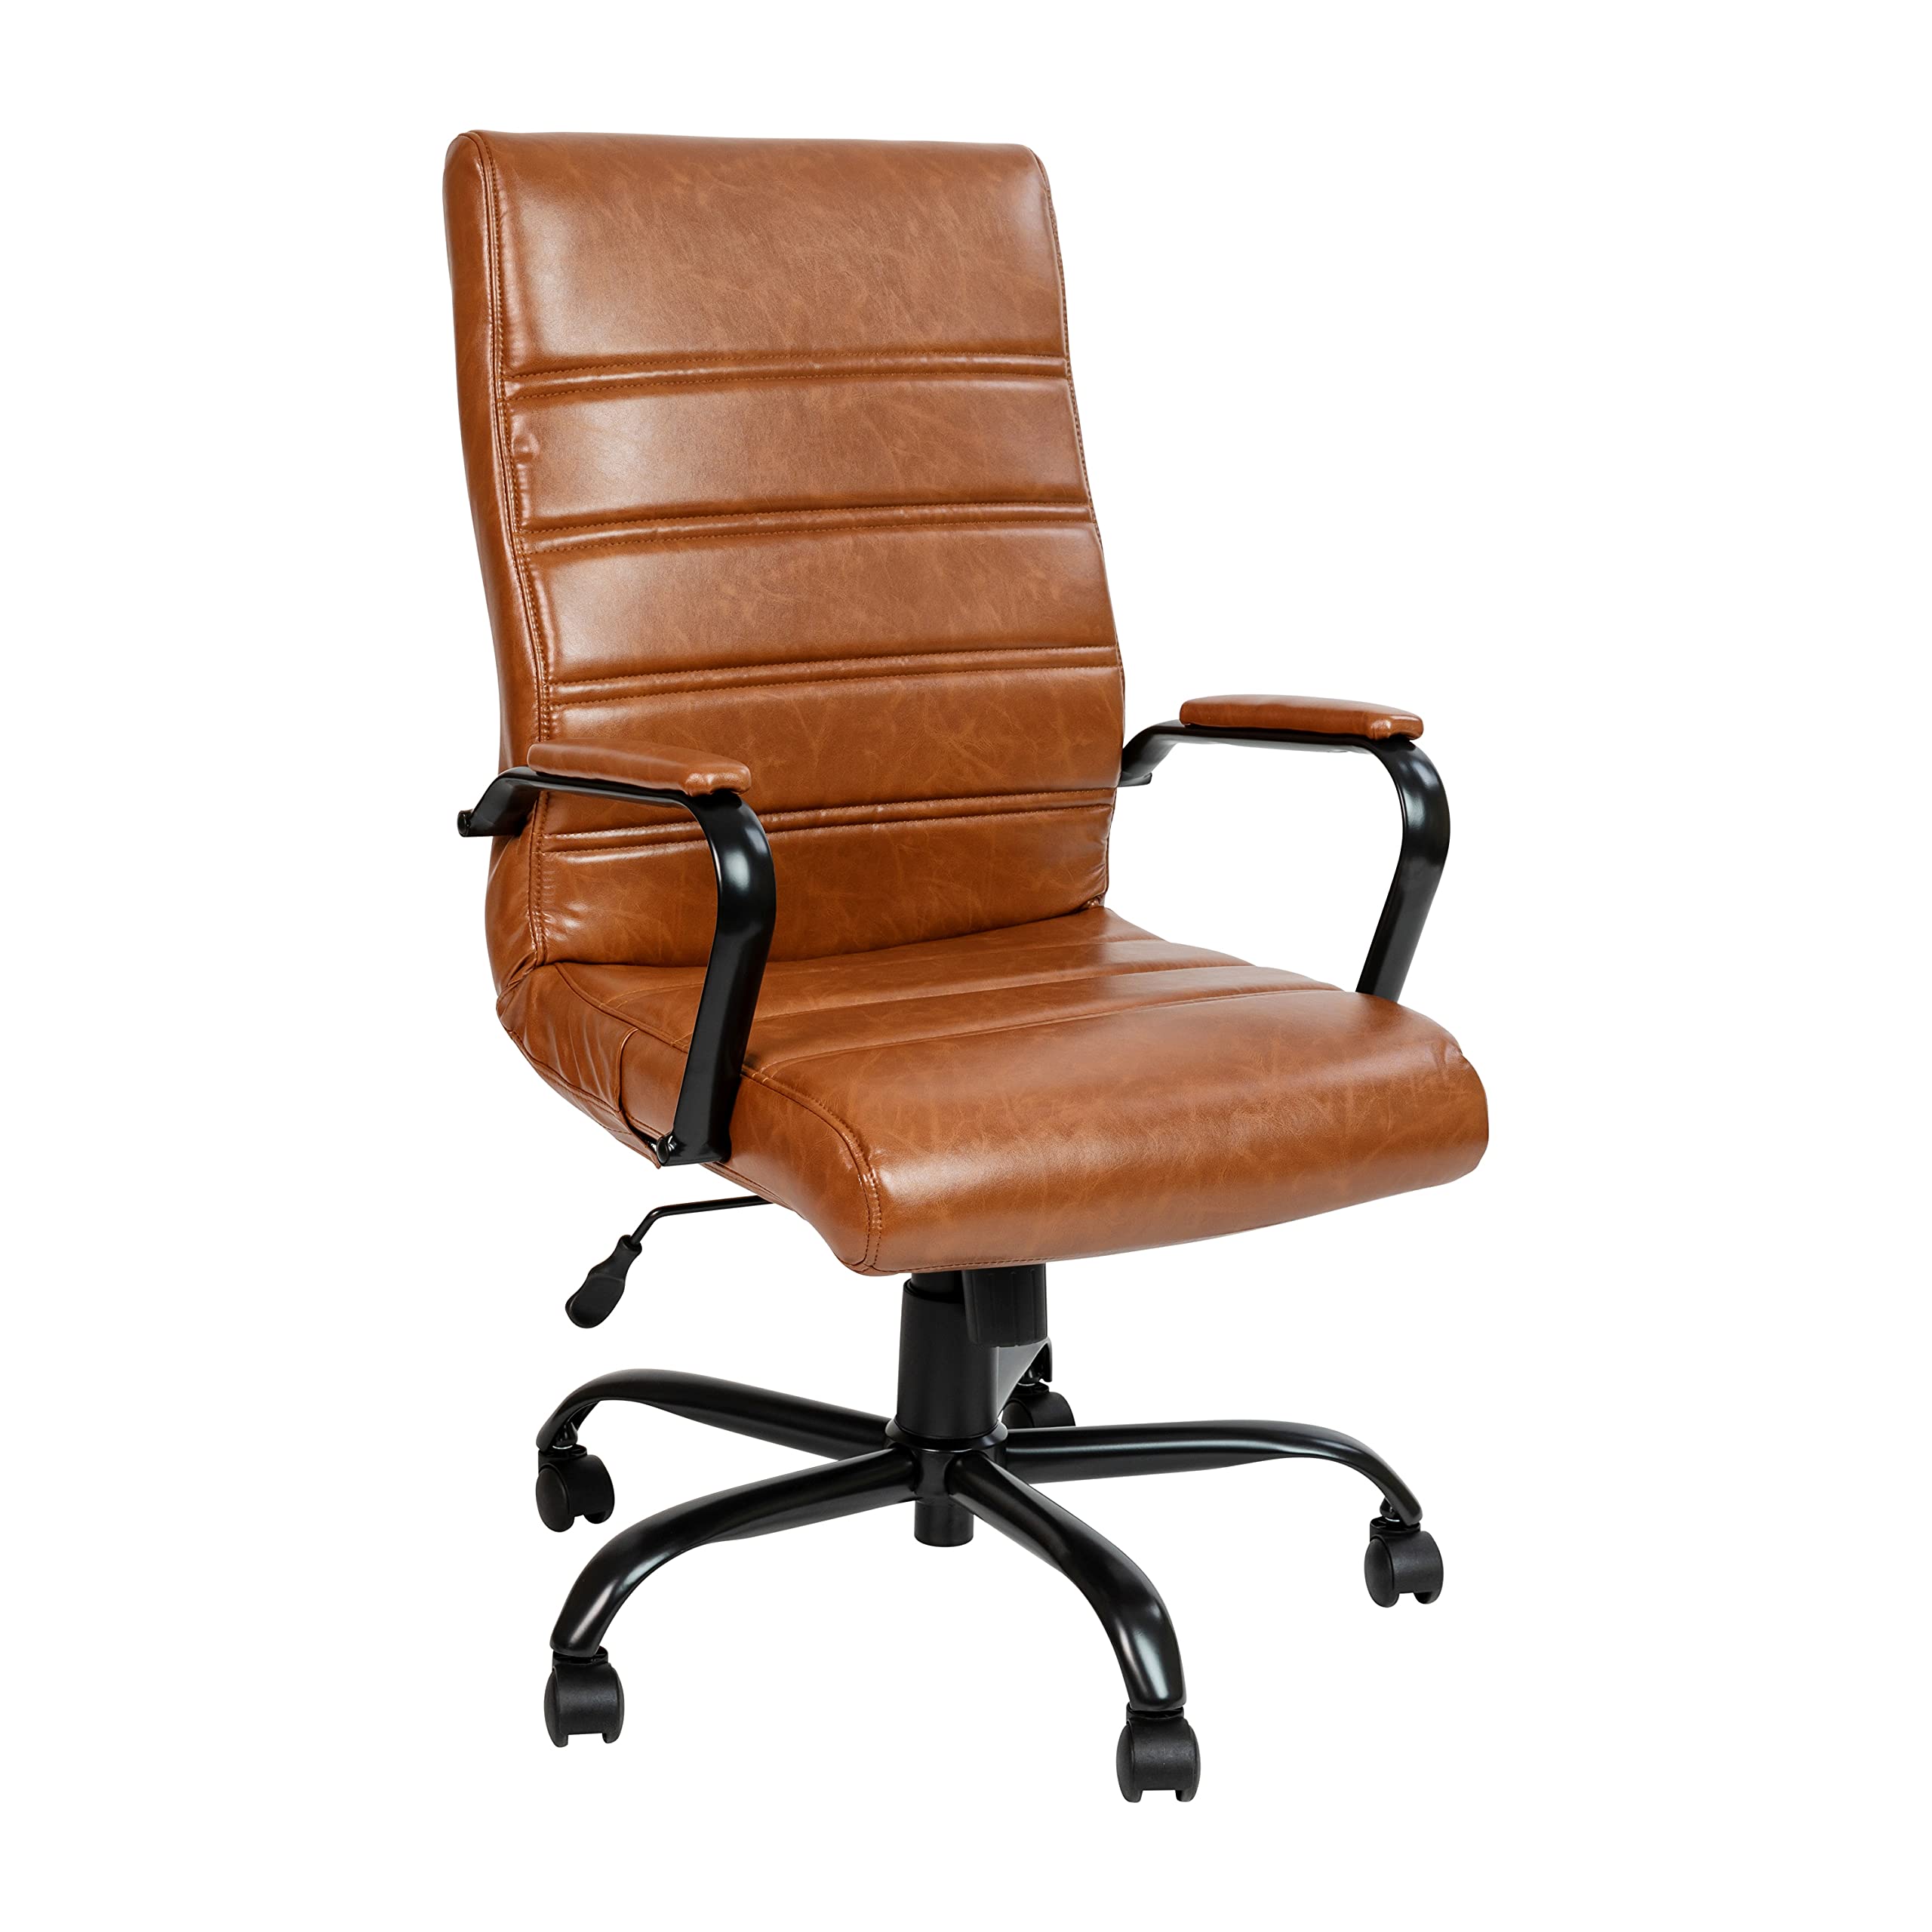 EMMA + OLIVER High Back Brown LeatherSoft Executive Swivel Office Chair with Black Frame/Arms